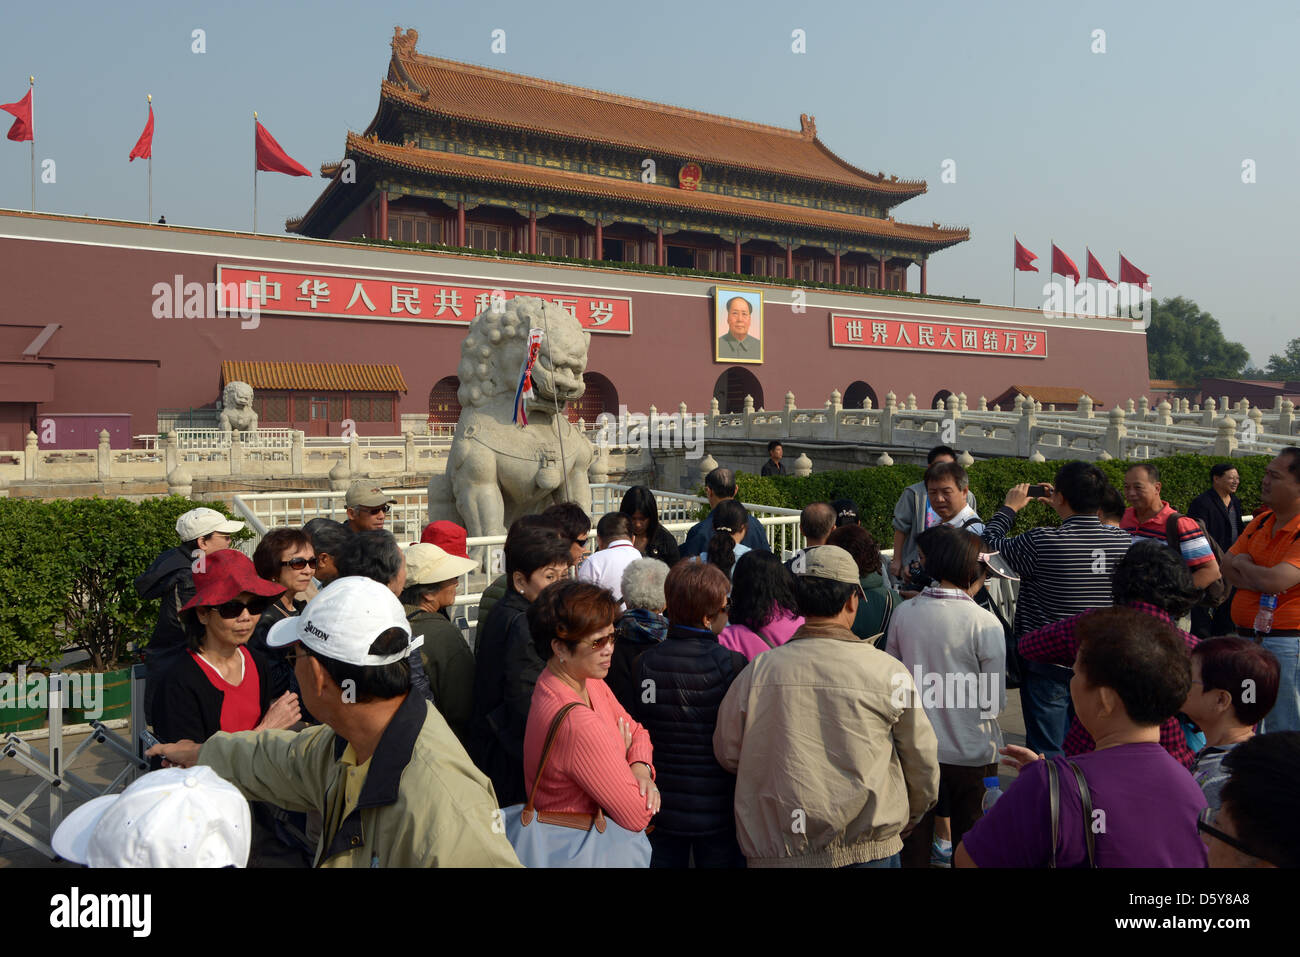 Many tourists stand in front of the main entrance to the Forbidden City, which carries a portrait of Mao Zedong, in Beijing, China, 12 October 2012. Photo: Rainer Jensen Stock Photo